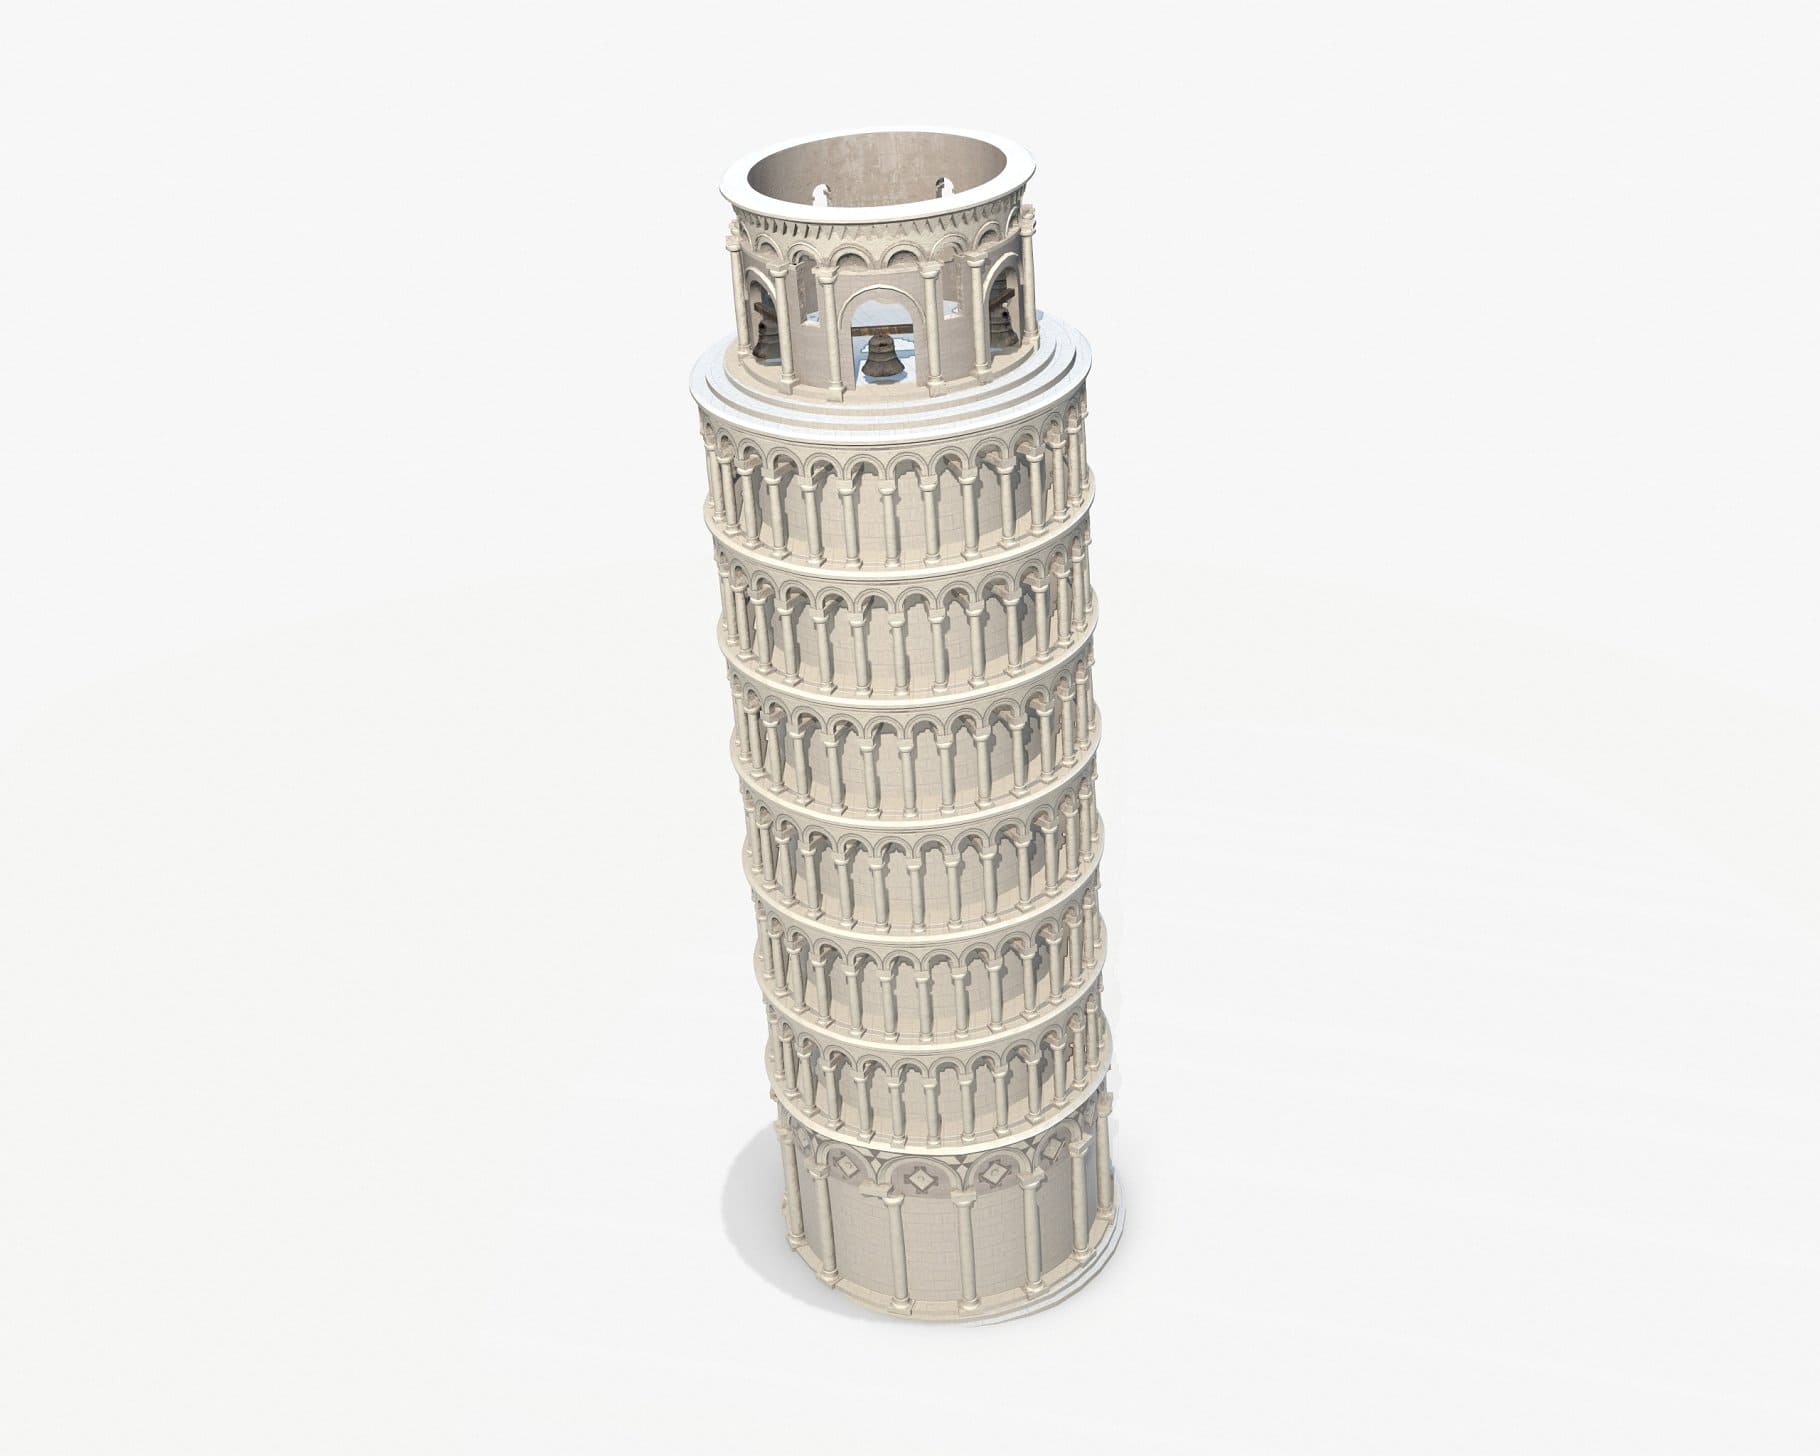 Top view of the 3D model of the Leaning Tower of Pisa.